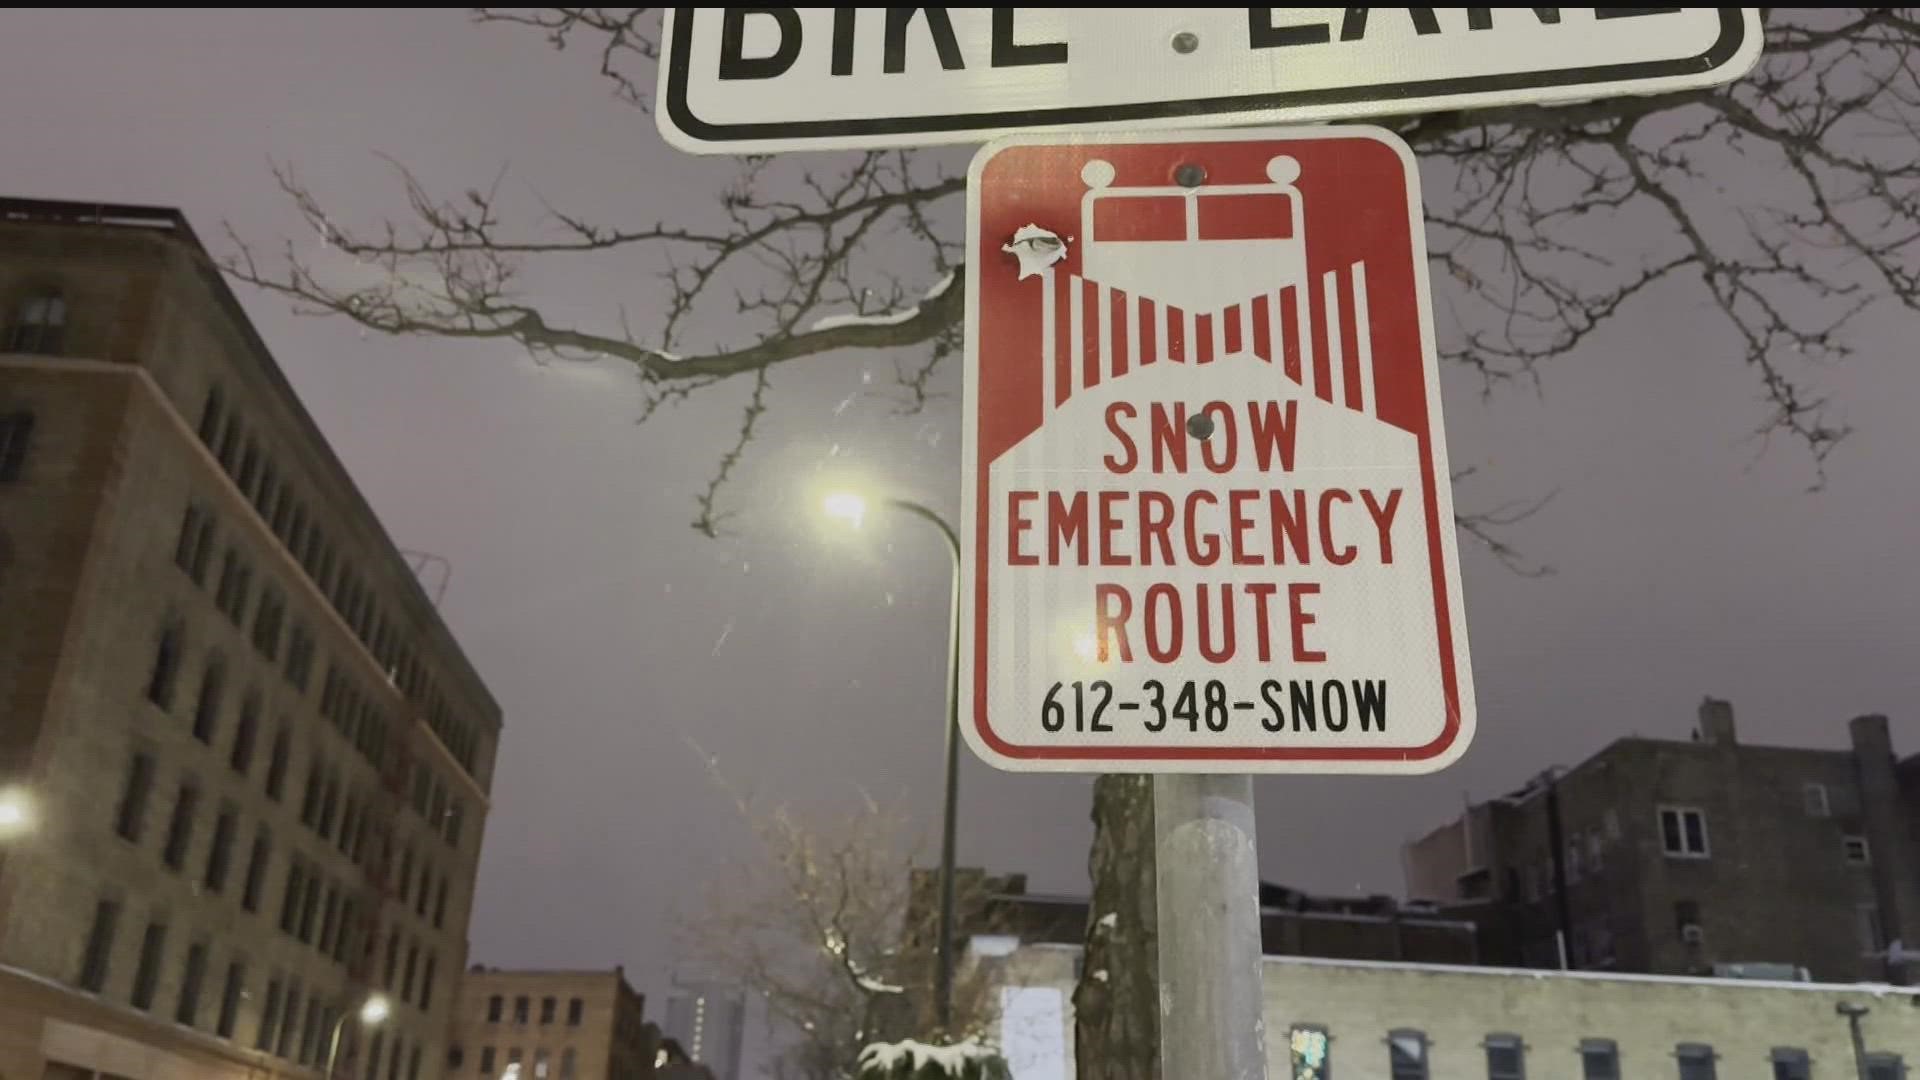 Minneapolis, St. Paul and many other metro communities are under a snow emergency on Wednesday morning.